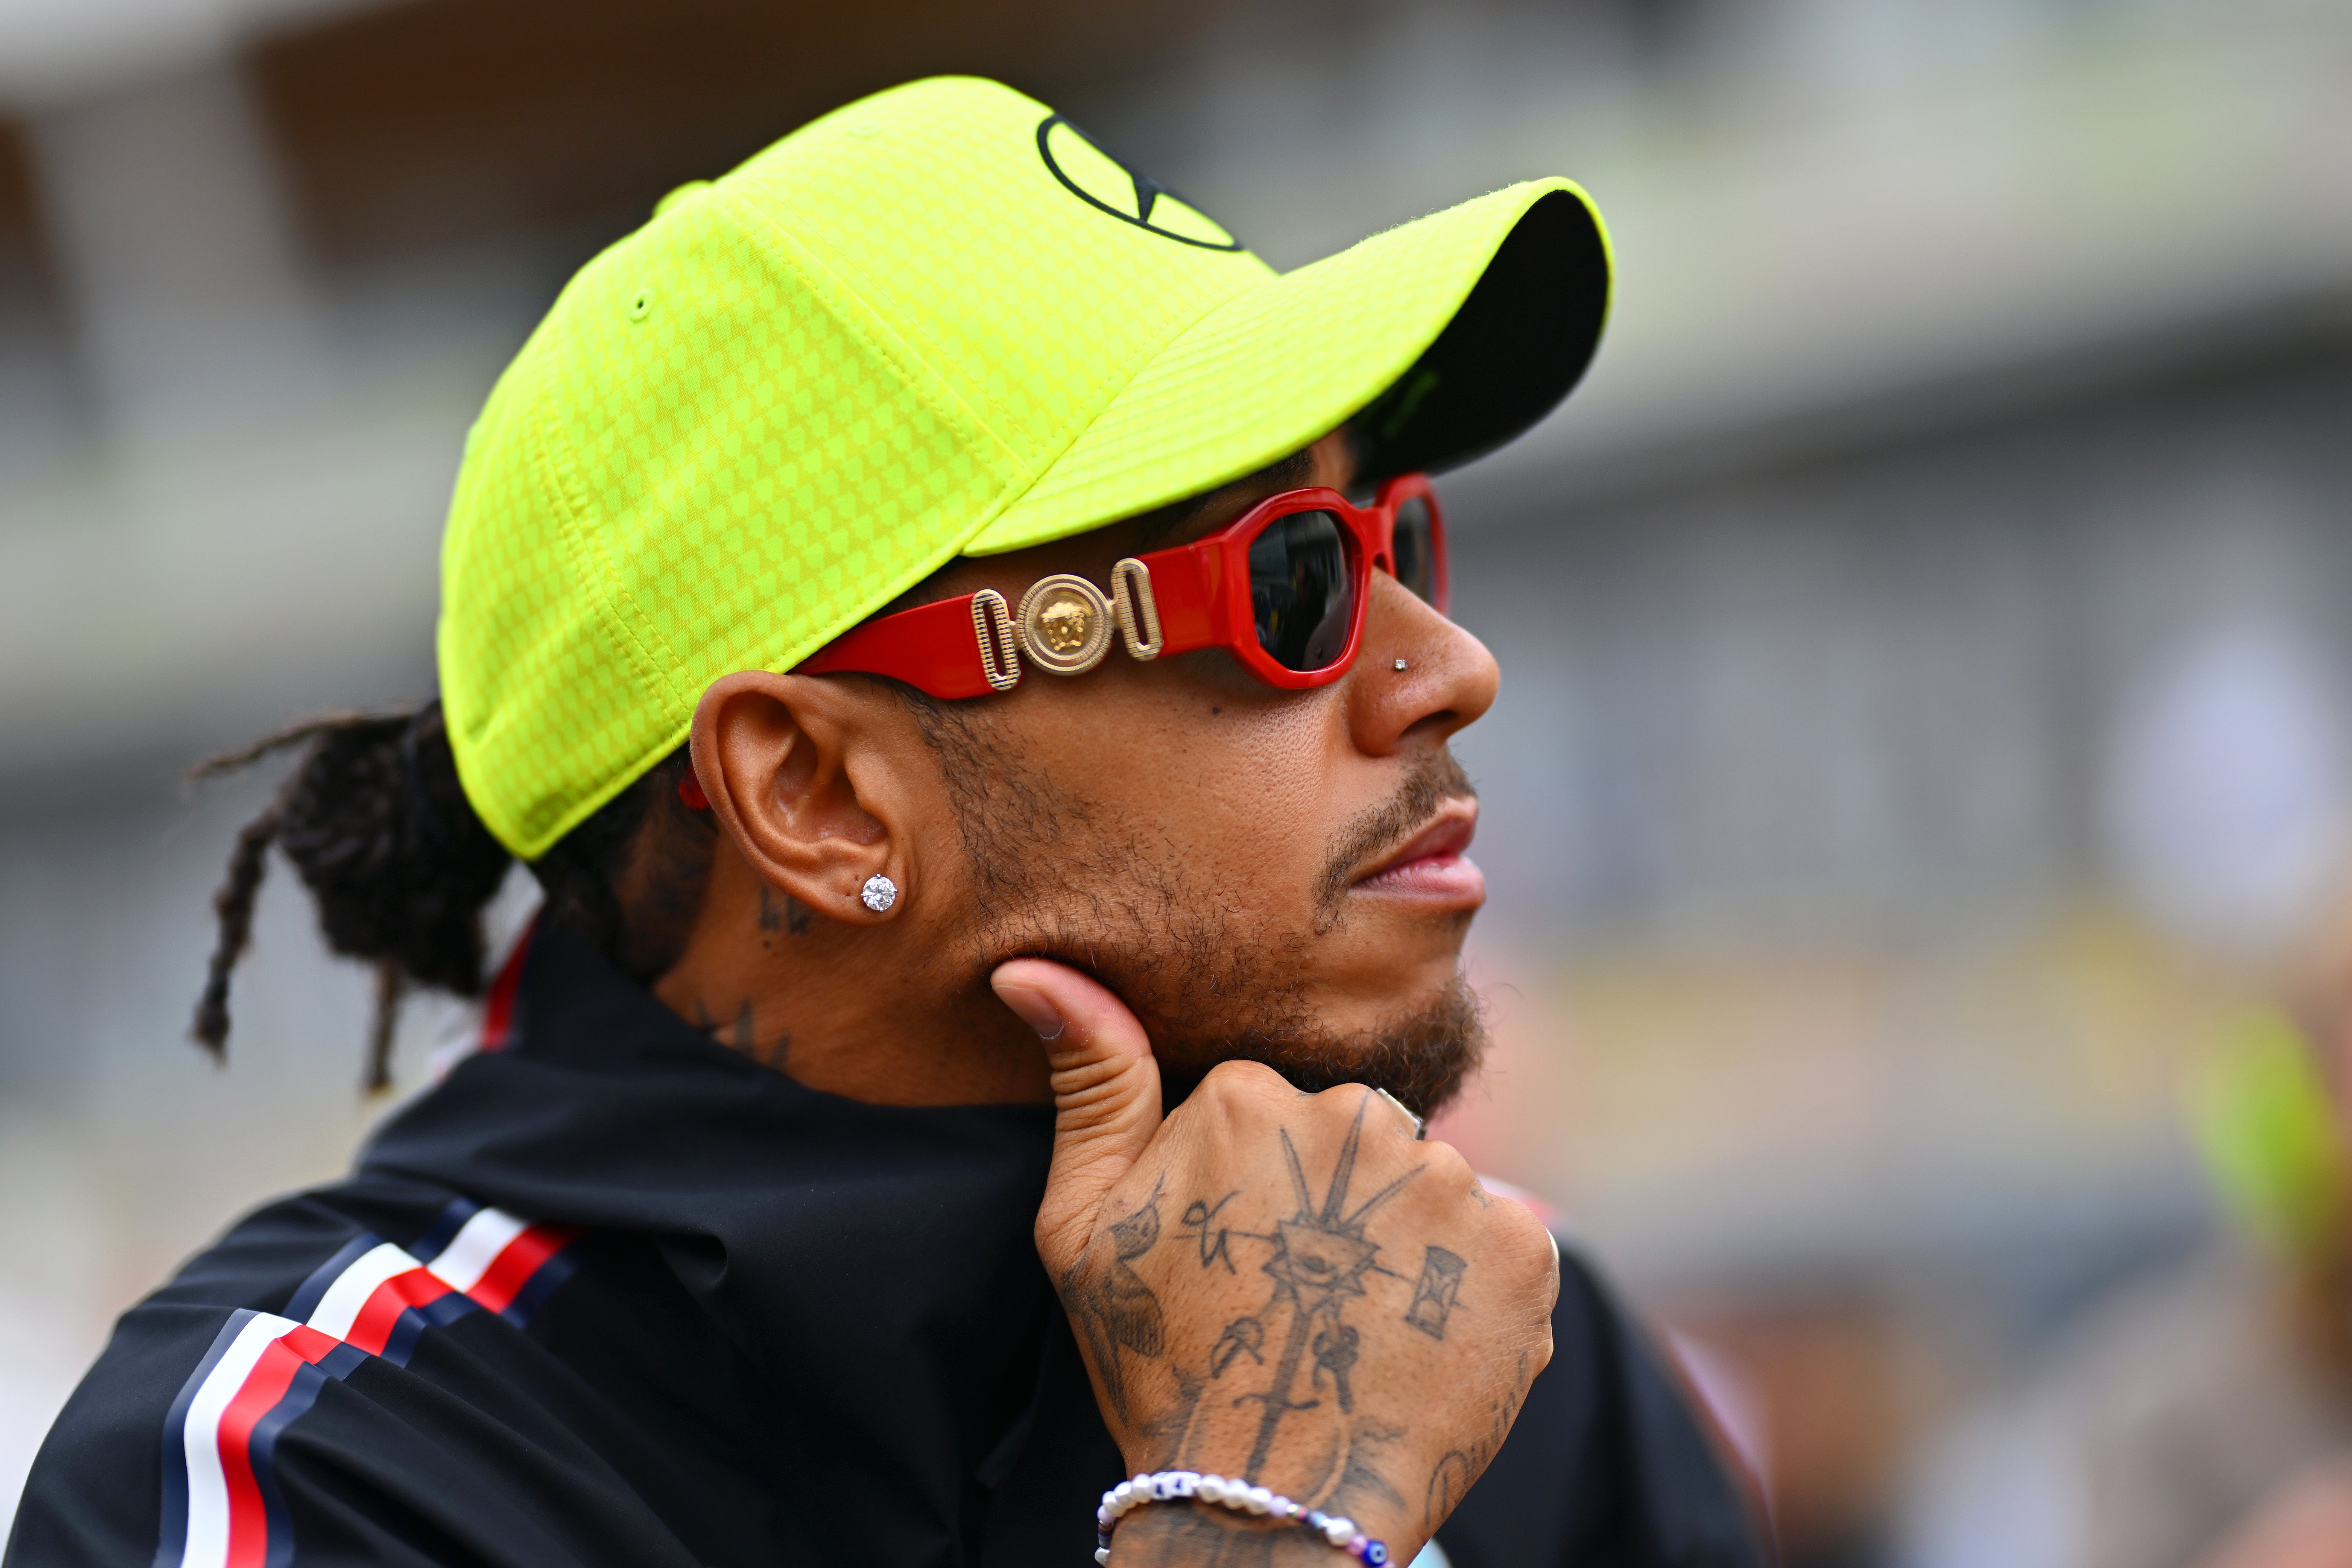 Lewis Hamilton’s contract at Mercedes expires at the end of this season